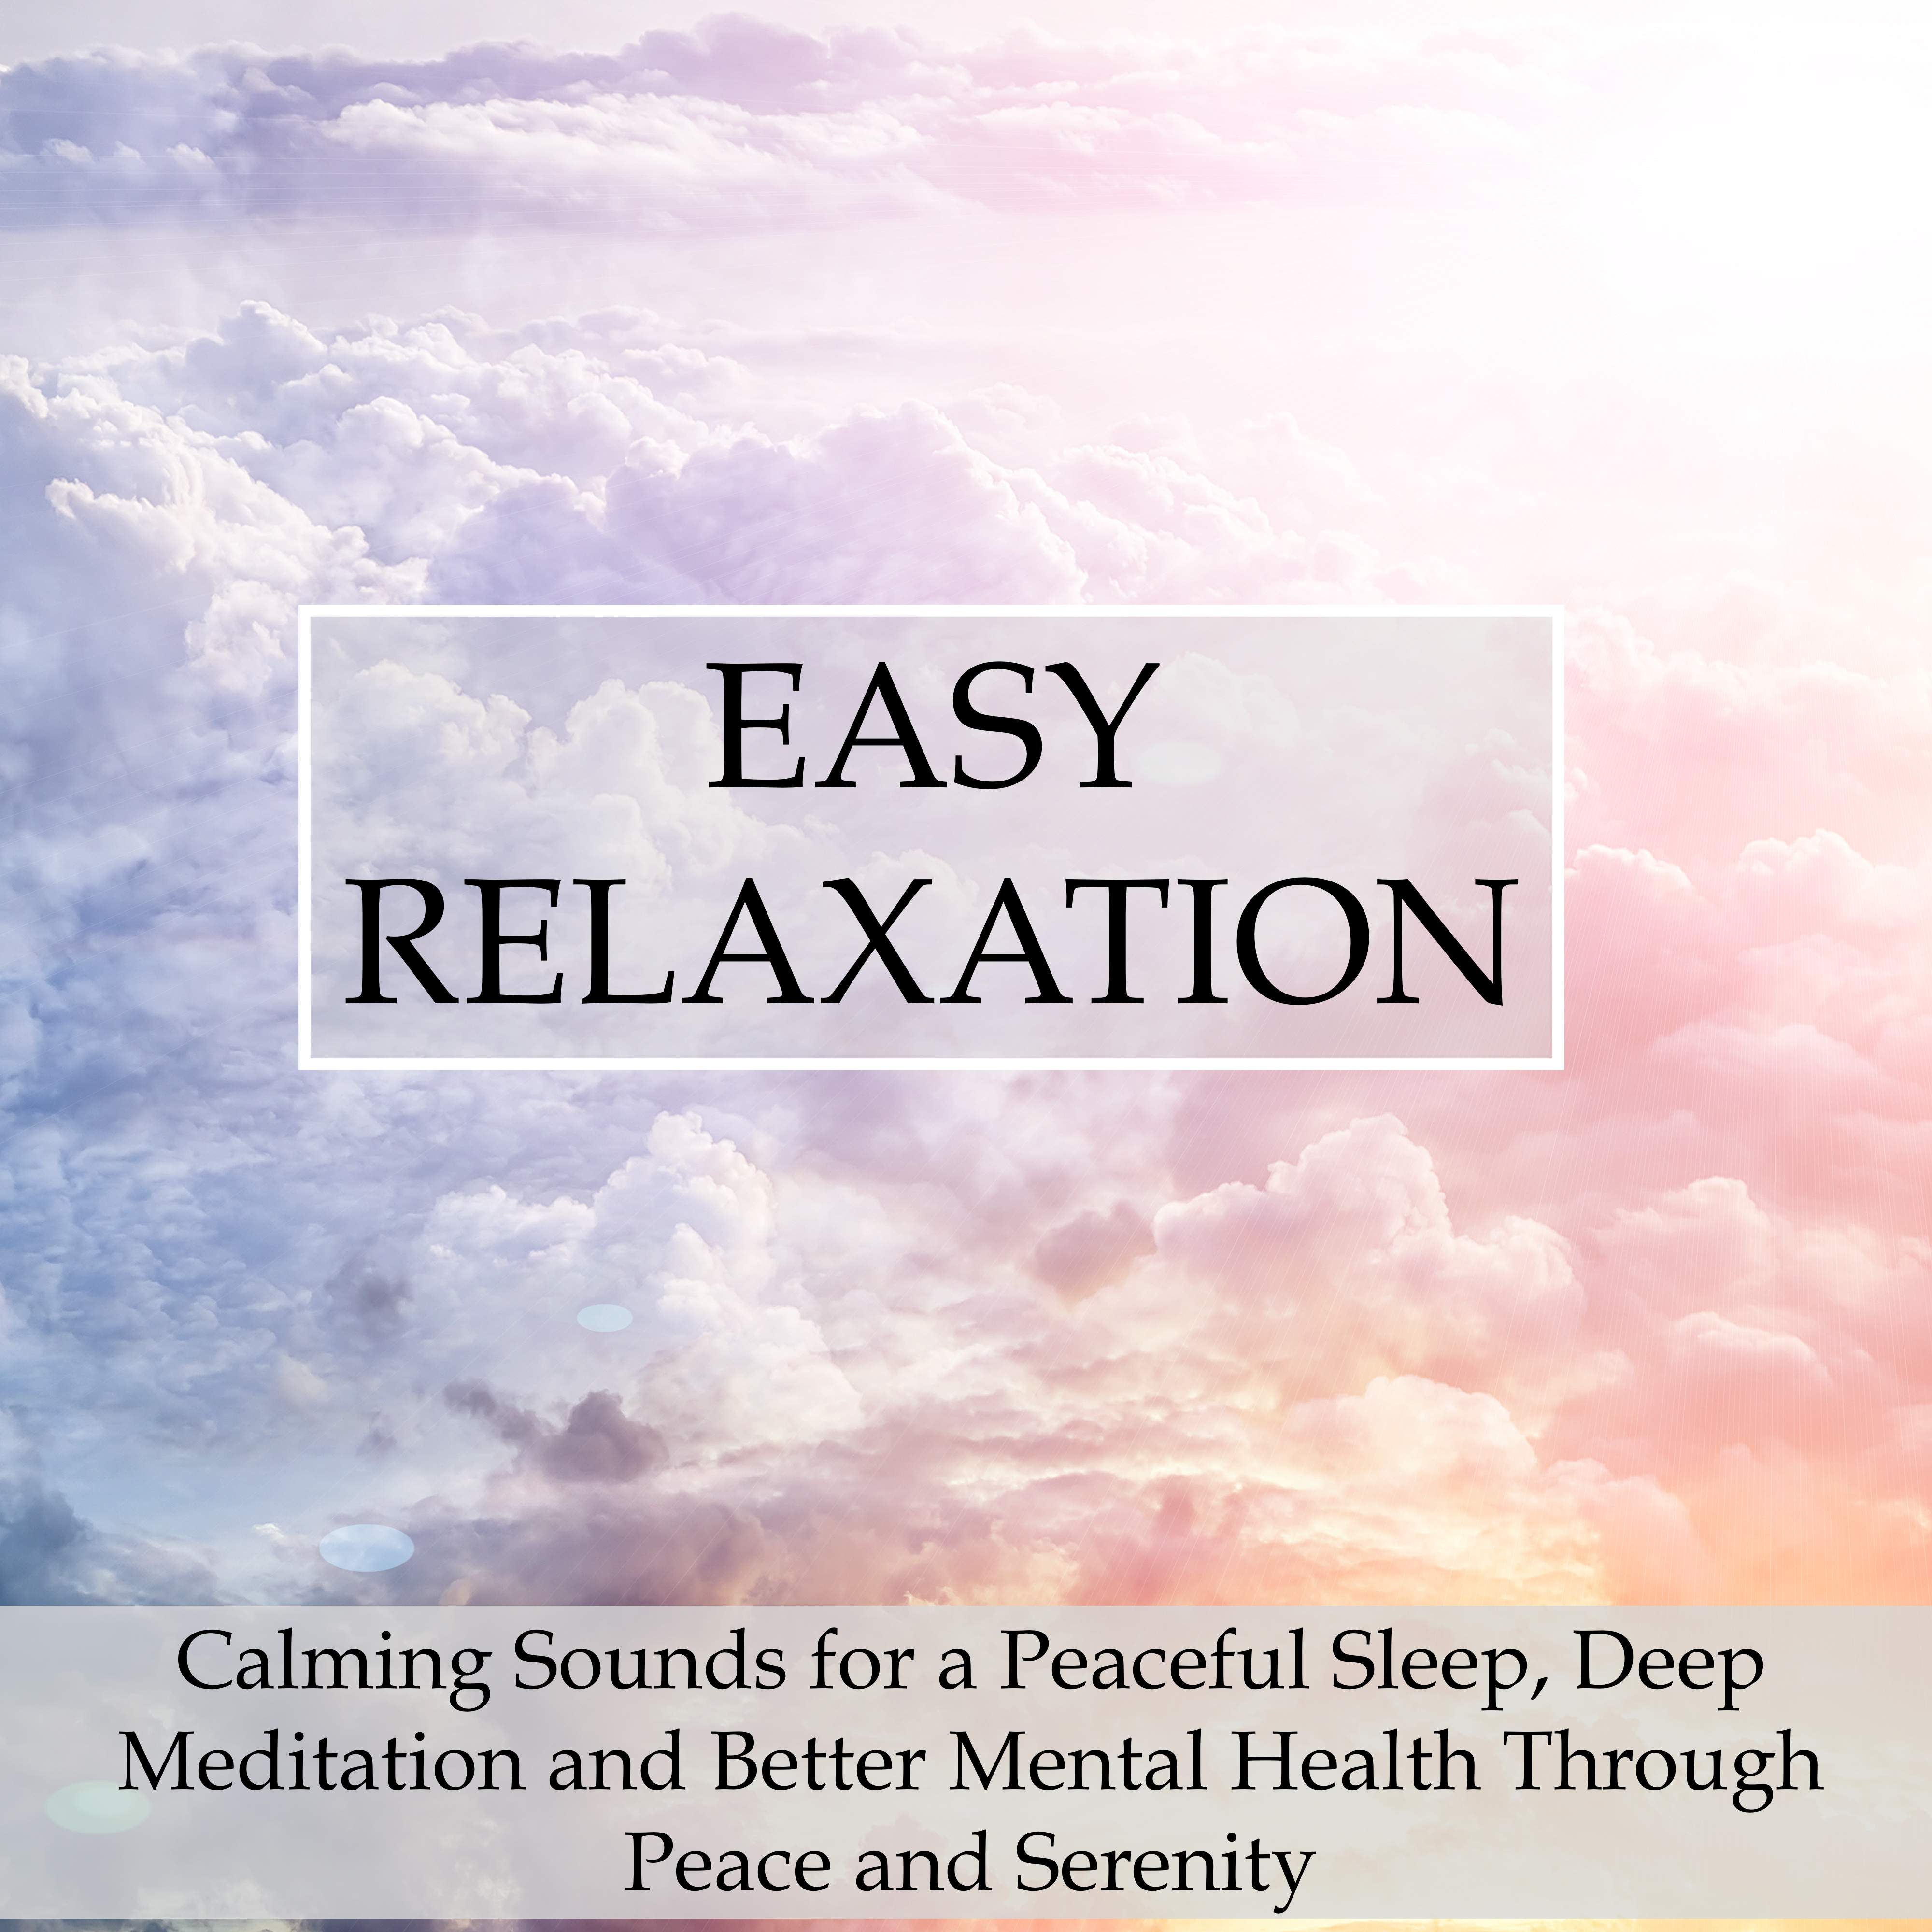 Easy Relaxation - Calming Sounds for a Peaceful Sleep, Deep Meditation and Better Mental Health Through Peace and Serenity